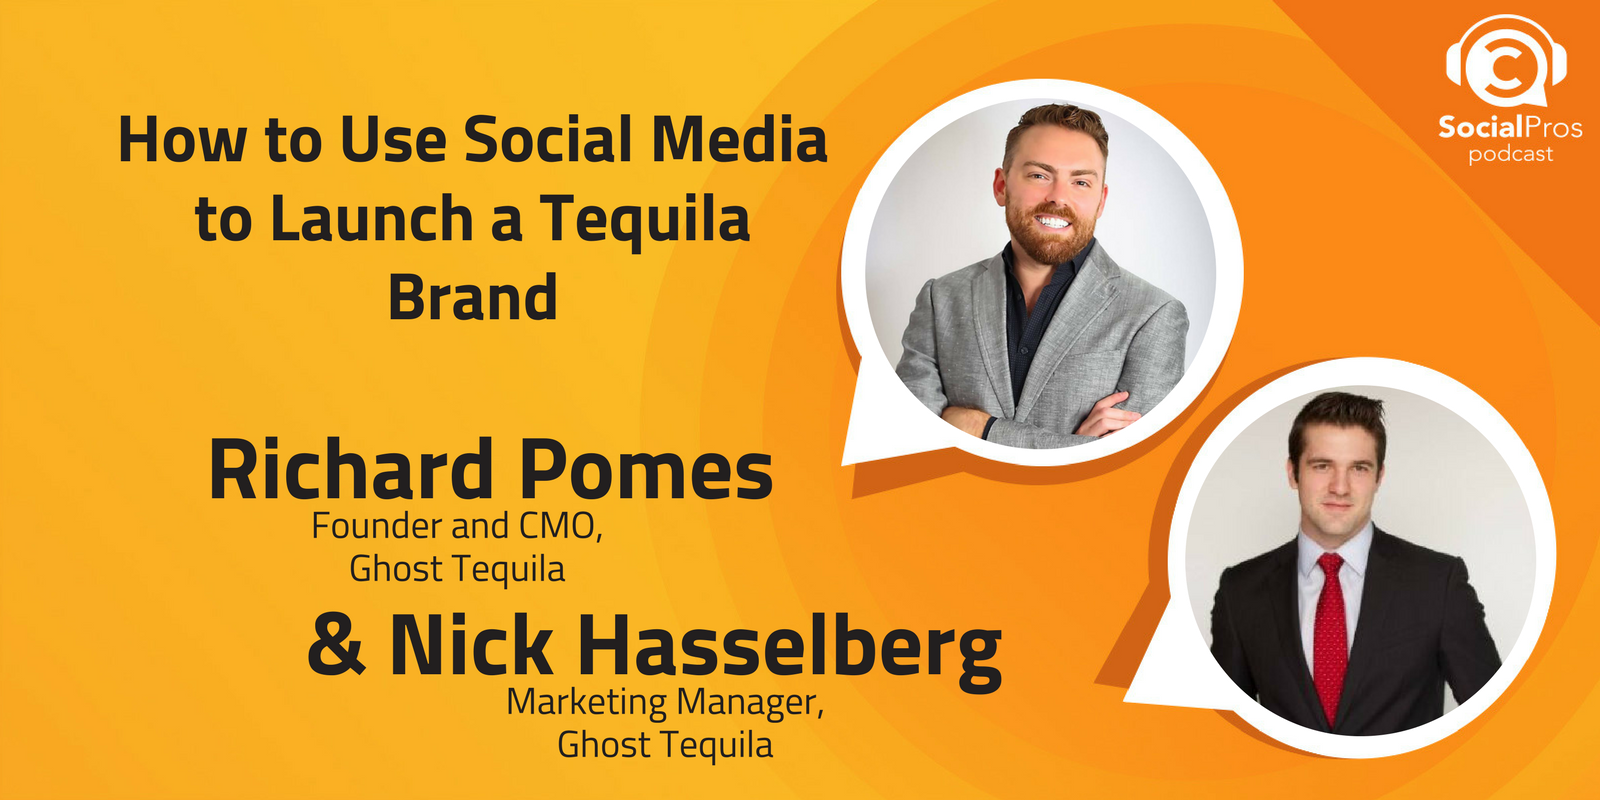 How to Use Social Media to Launch a Tequila Brand